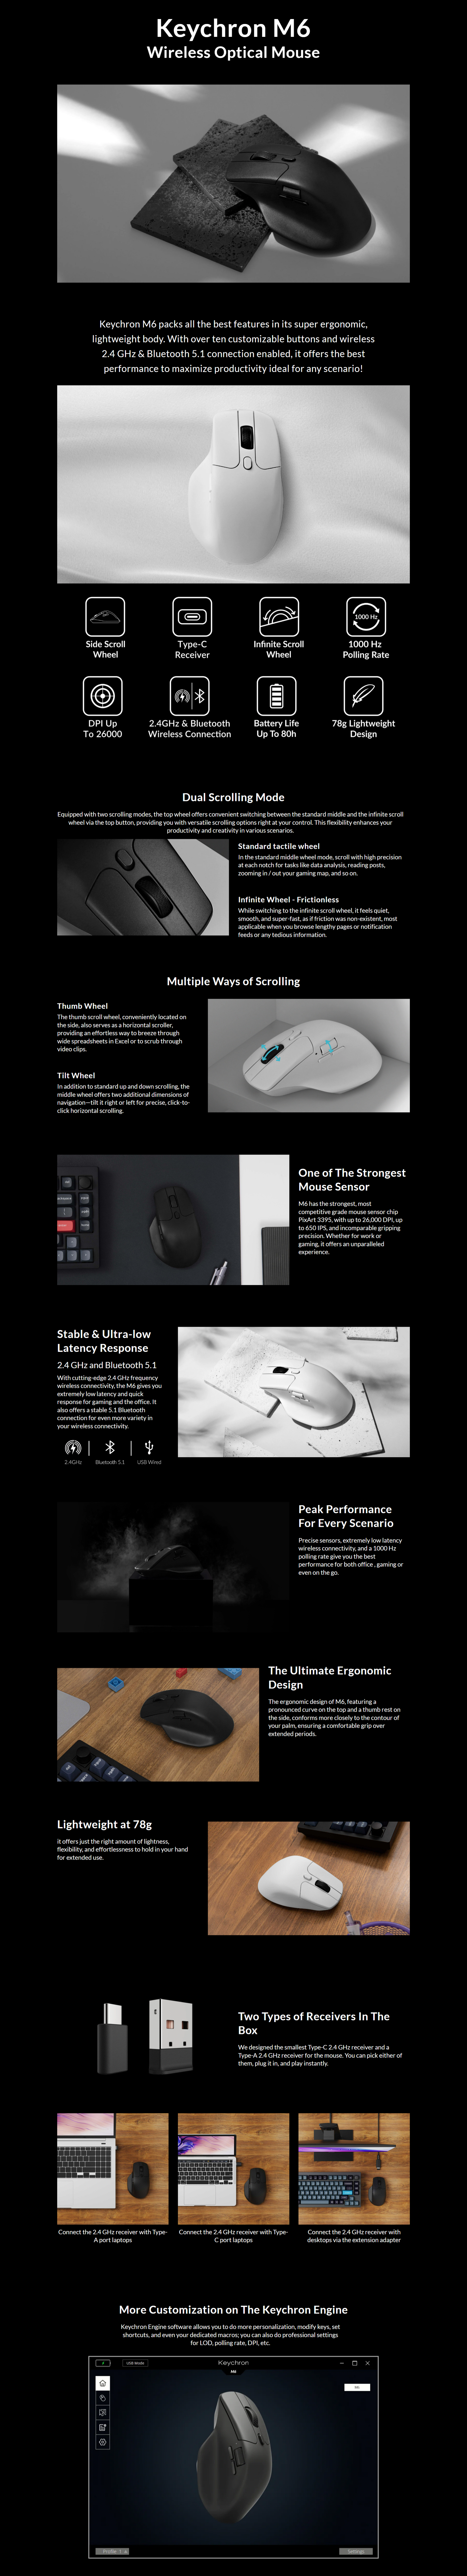 A large marketing image providing additional information about the product Keychron M6 Wireless Mouse - White - Additional alt info not provided